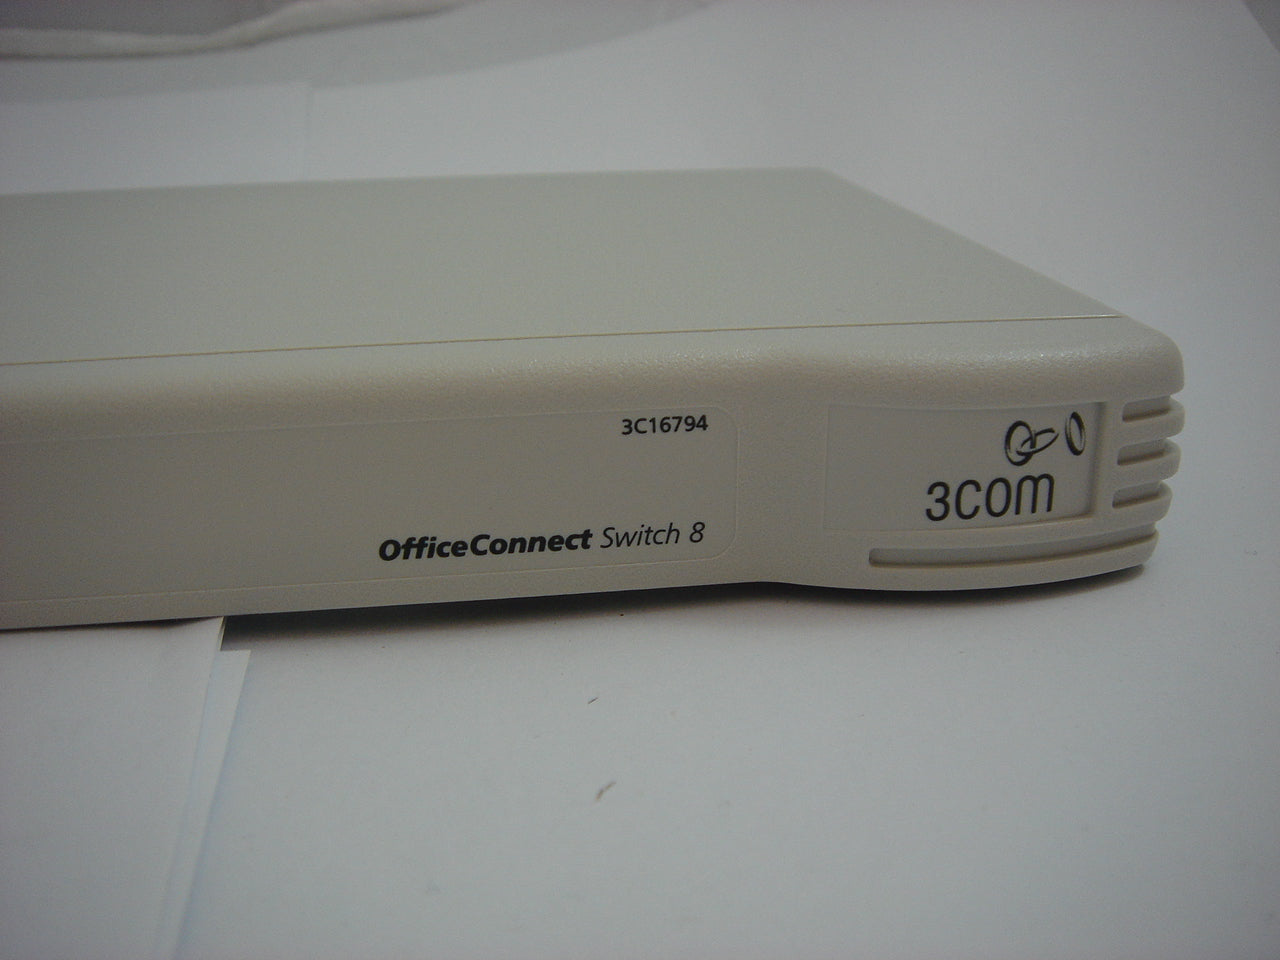 PR02864_3C16794_3Com, Office Connect Switch 8, 10/100 Fast - Image3